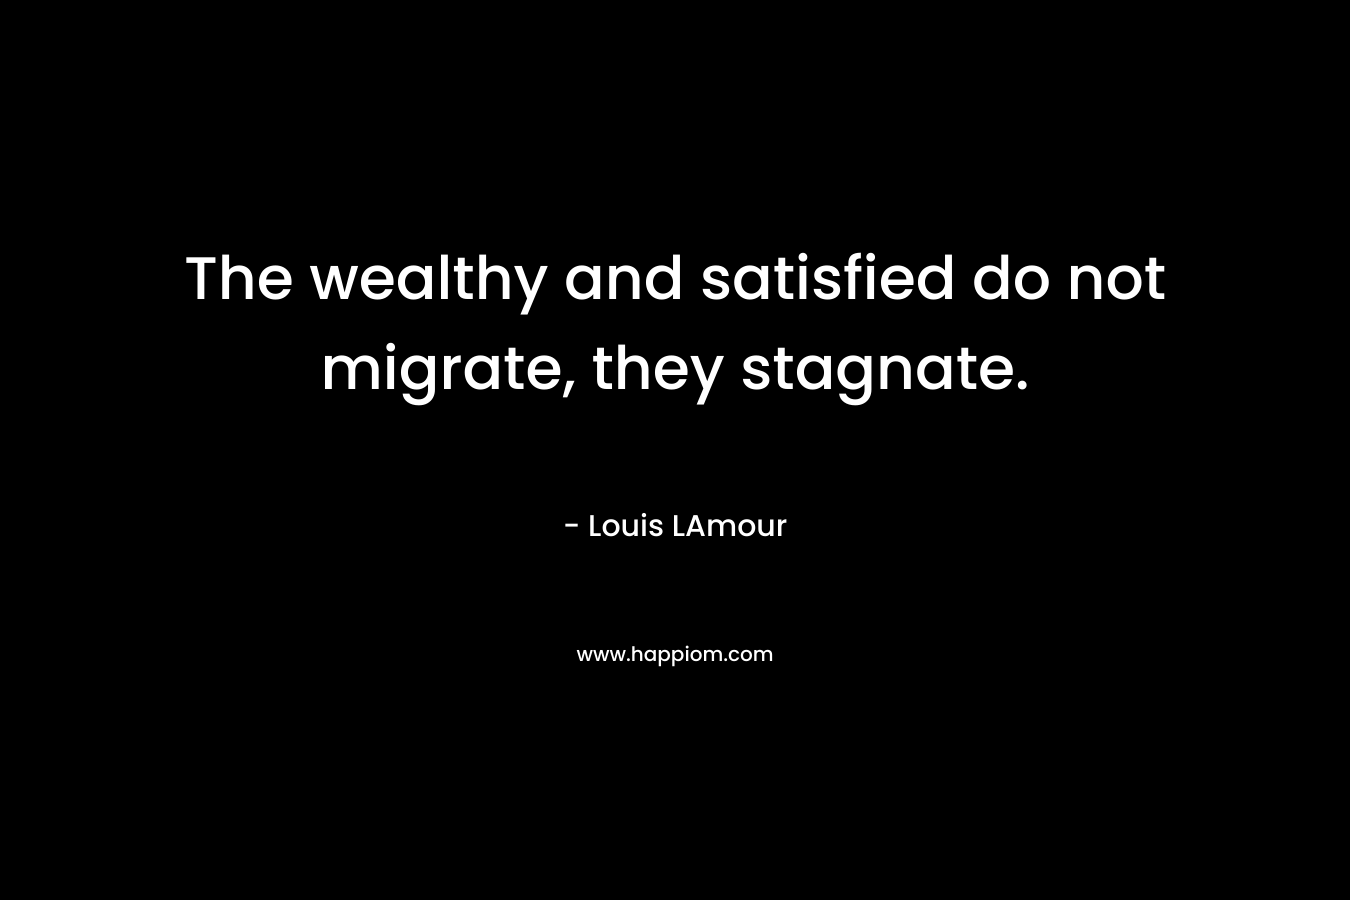 The wealthy and satisfied do not migrate, they stagnate. – Louis LAmour